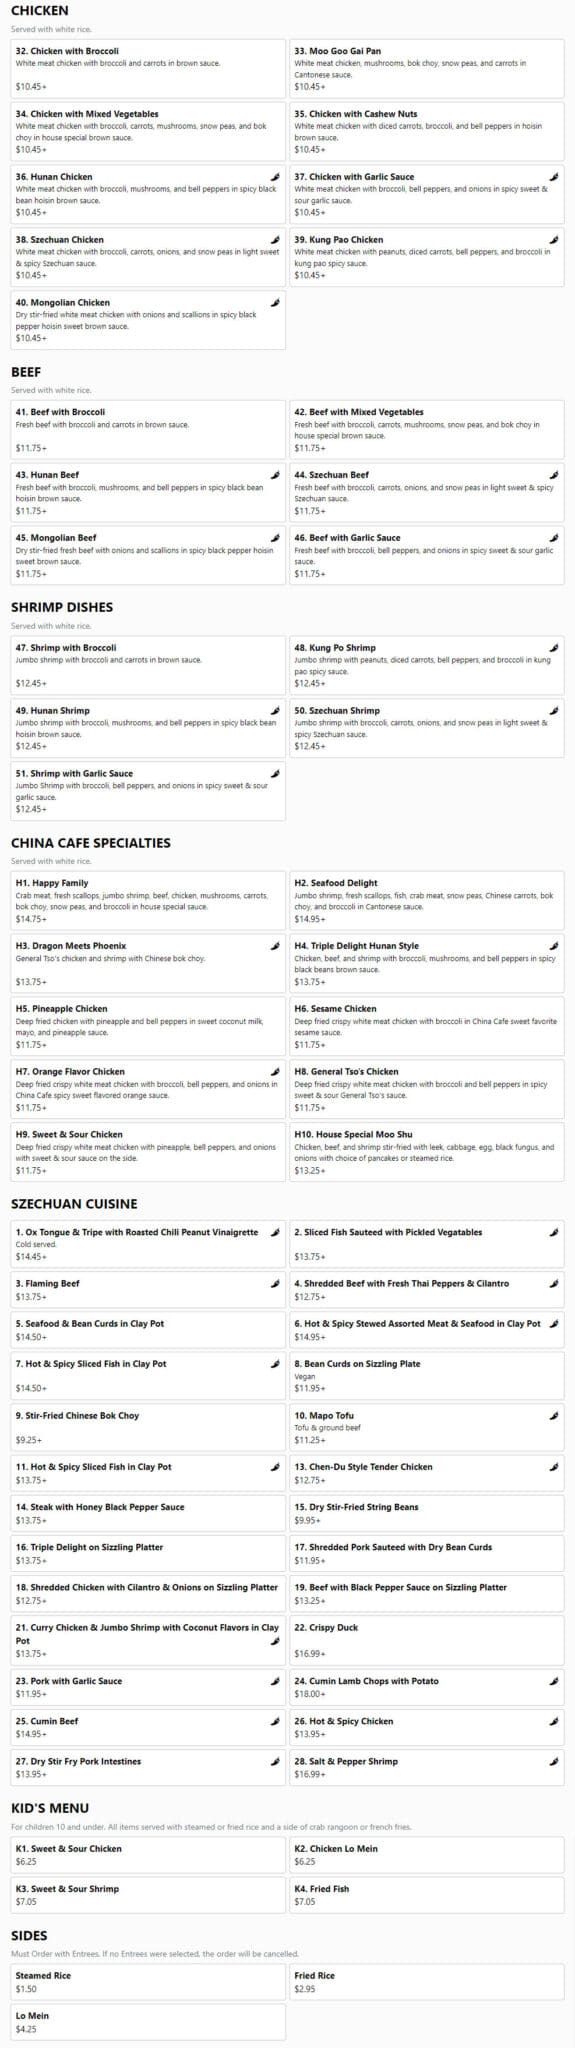 China Cafe - Menu with Prices